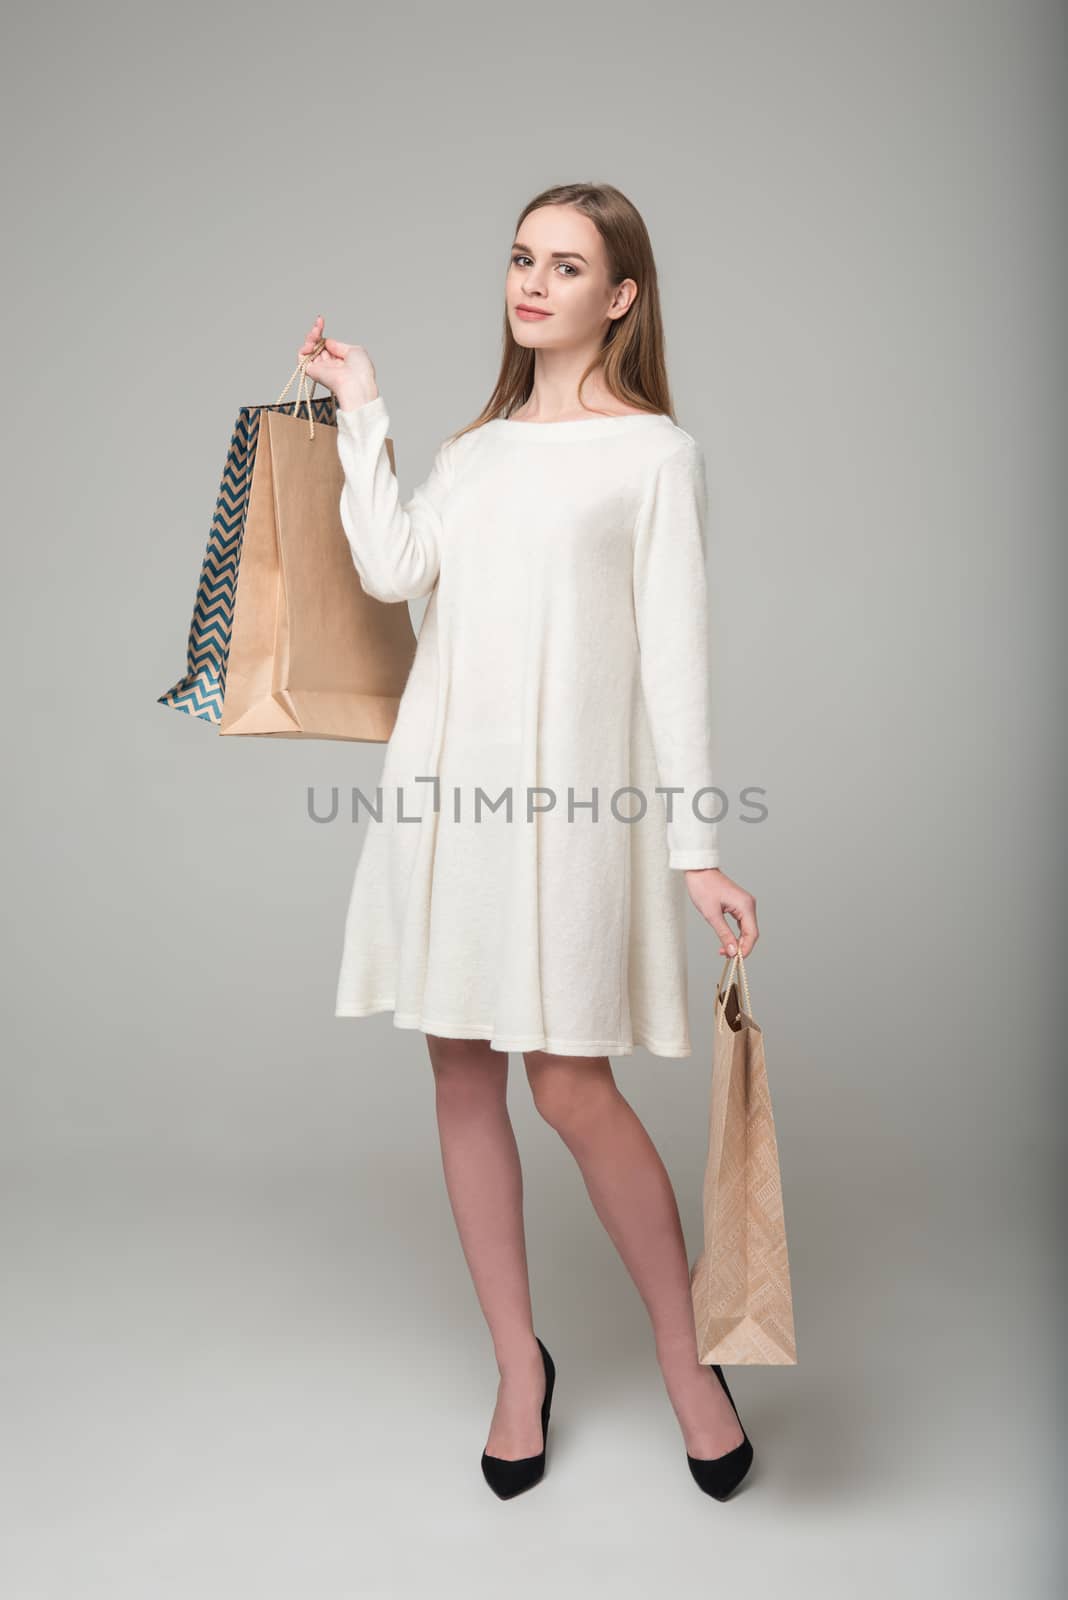 Young model long-haired blond girl in white short dress stands holding shopping packages